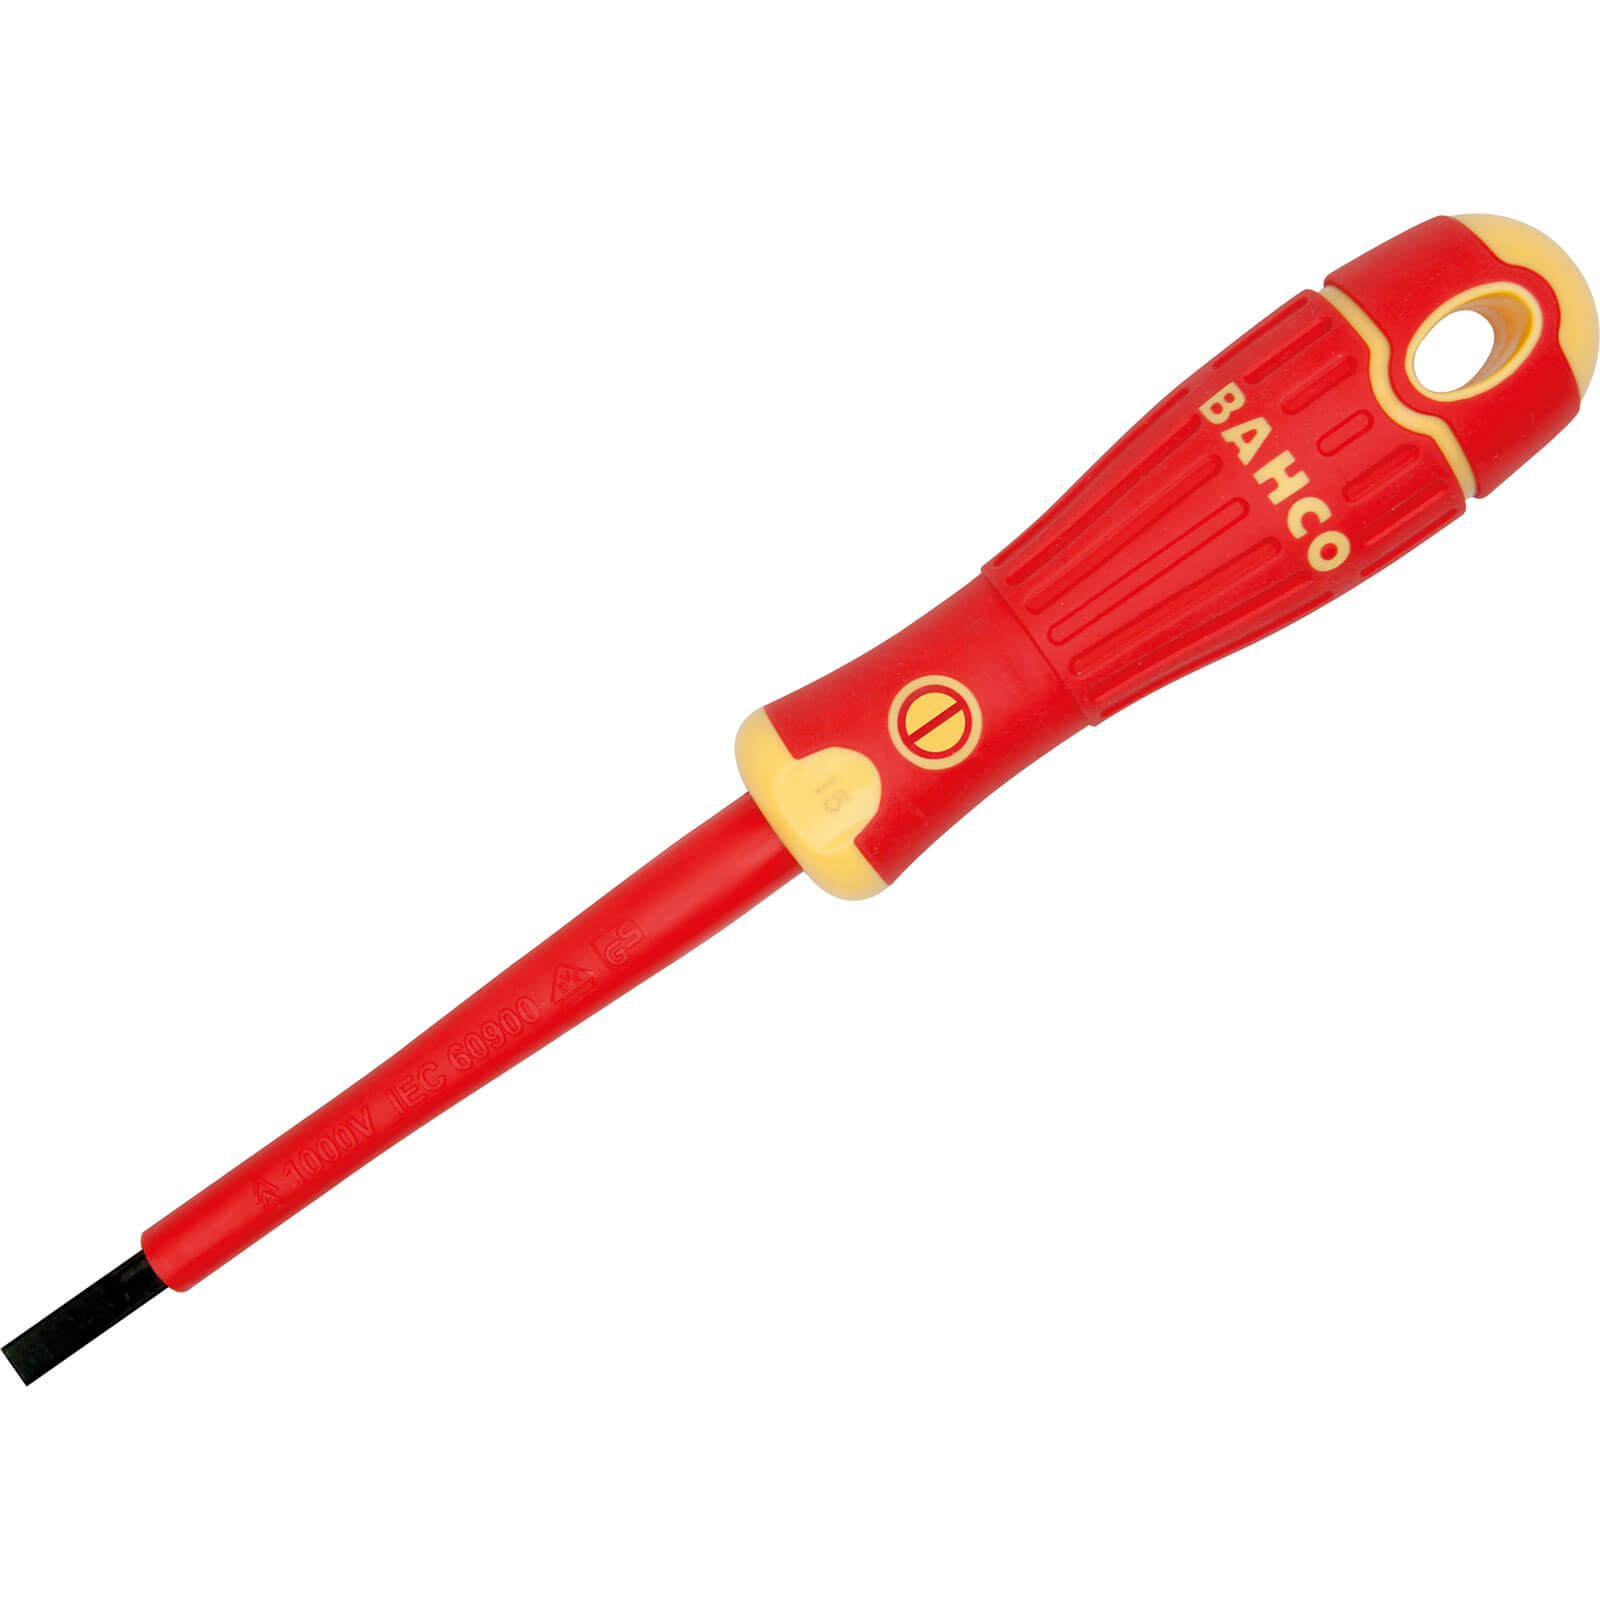 Photo of Bahco Vde Insulated Slotted Screwdriver 6.5mm 150mm